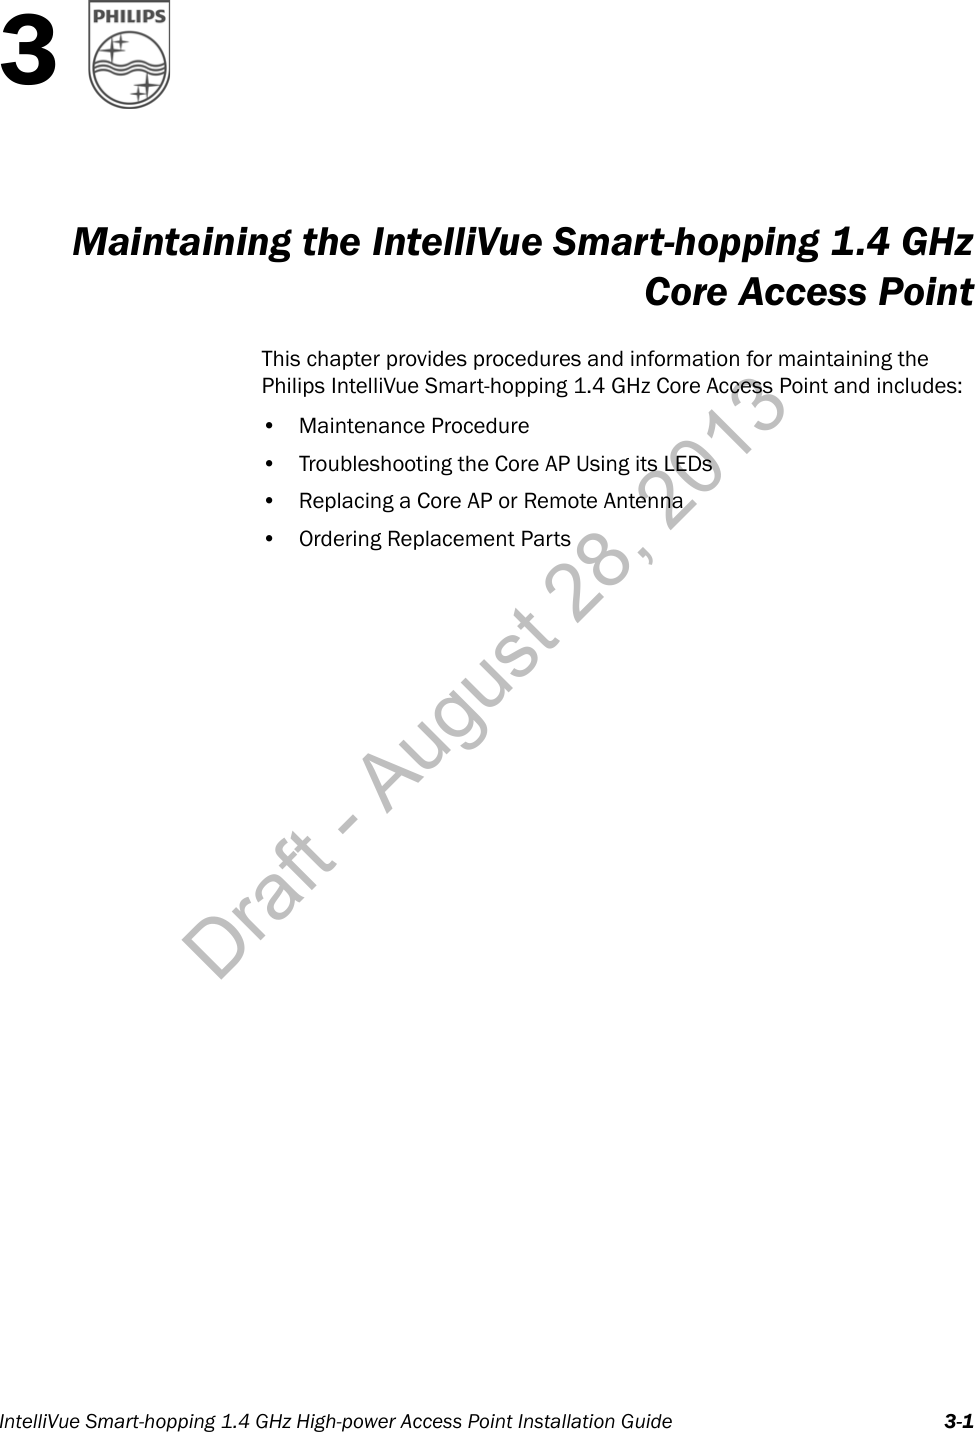 IntelliVue Smart-hopping 1.4 GHz High-power Access Point Installation Guide 3-13Maintaining the IntelliVue Smart-hopping 1.4 GHzCore Access PointThis chapter provides procedures and information for maintaining the Philips IntelliVue Smart-hopping 1.4 GHz Core Access Point and includes:• Maintenance Procedure• Troubleshooting the Core AP Using its LEDs• Replacing a Core AP or Remote Antenna• Ordering Replacement PartsDraft - August 28, 2013